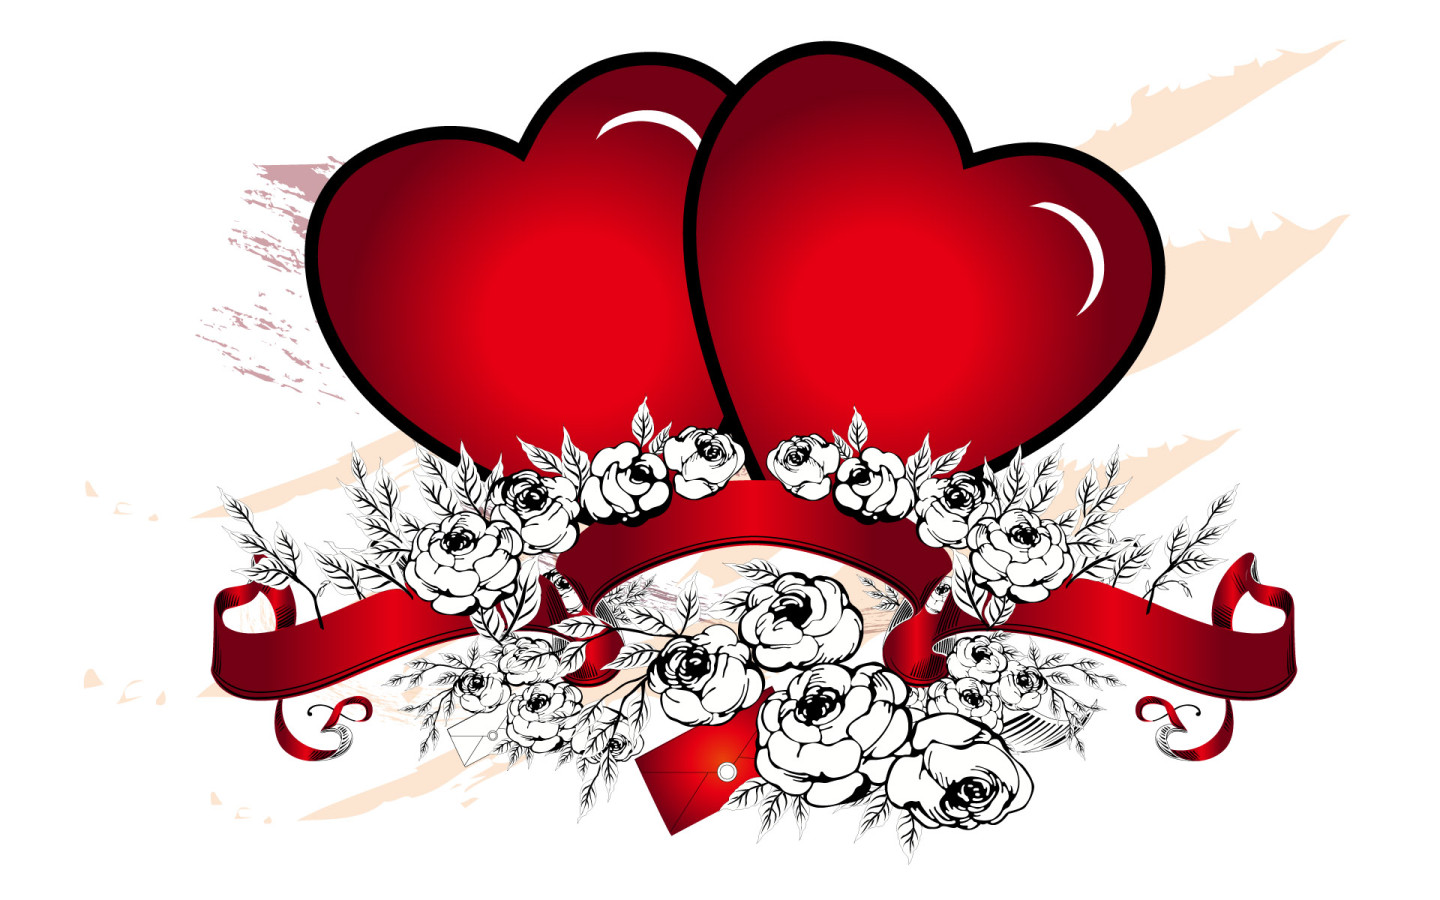 Valentines day hearts picture 2016 ♥♥ heart photos and 